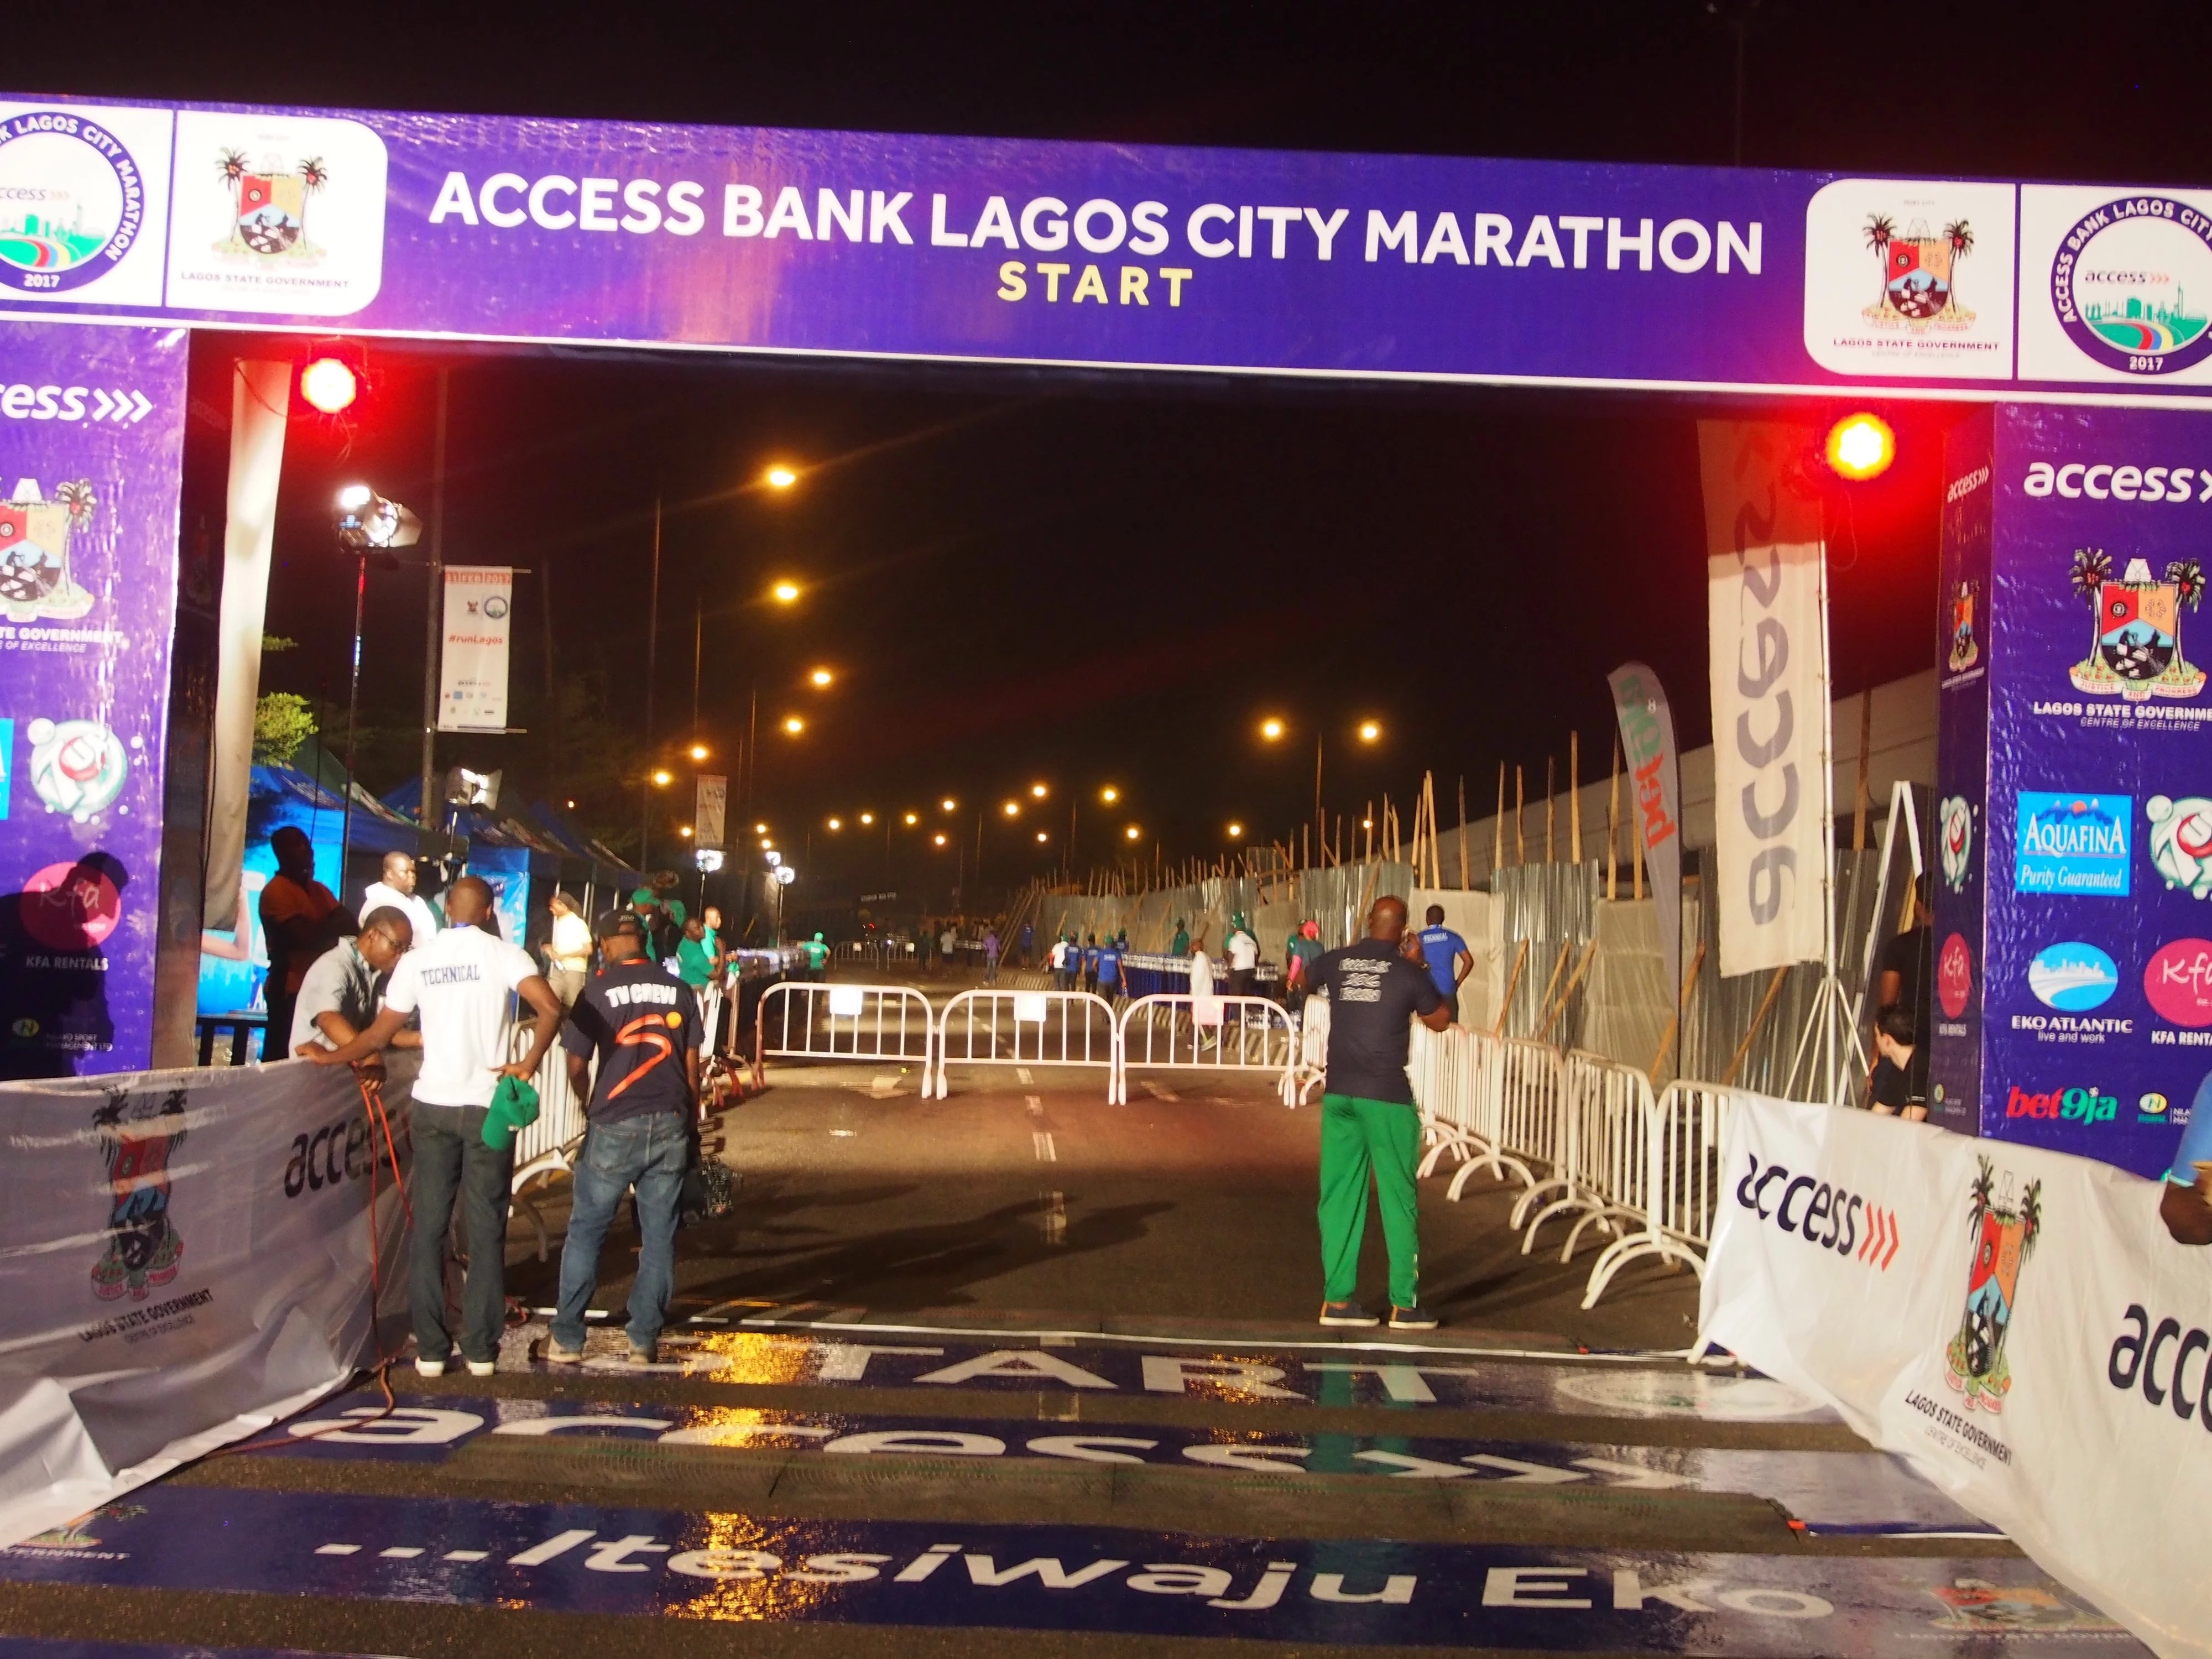 Lagos City Marathon: steal athletes' refreshments, Hoodlums attack 7UP officials